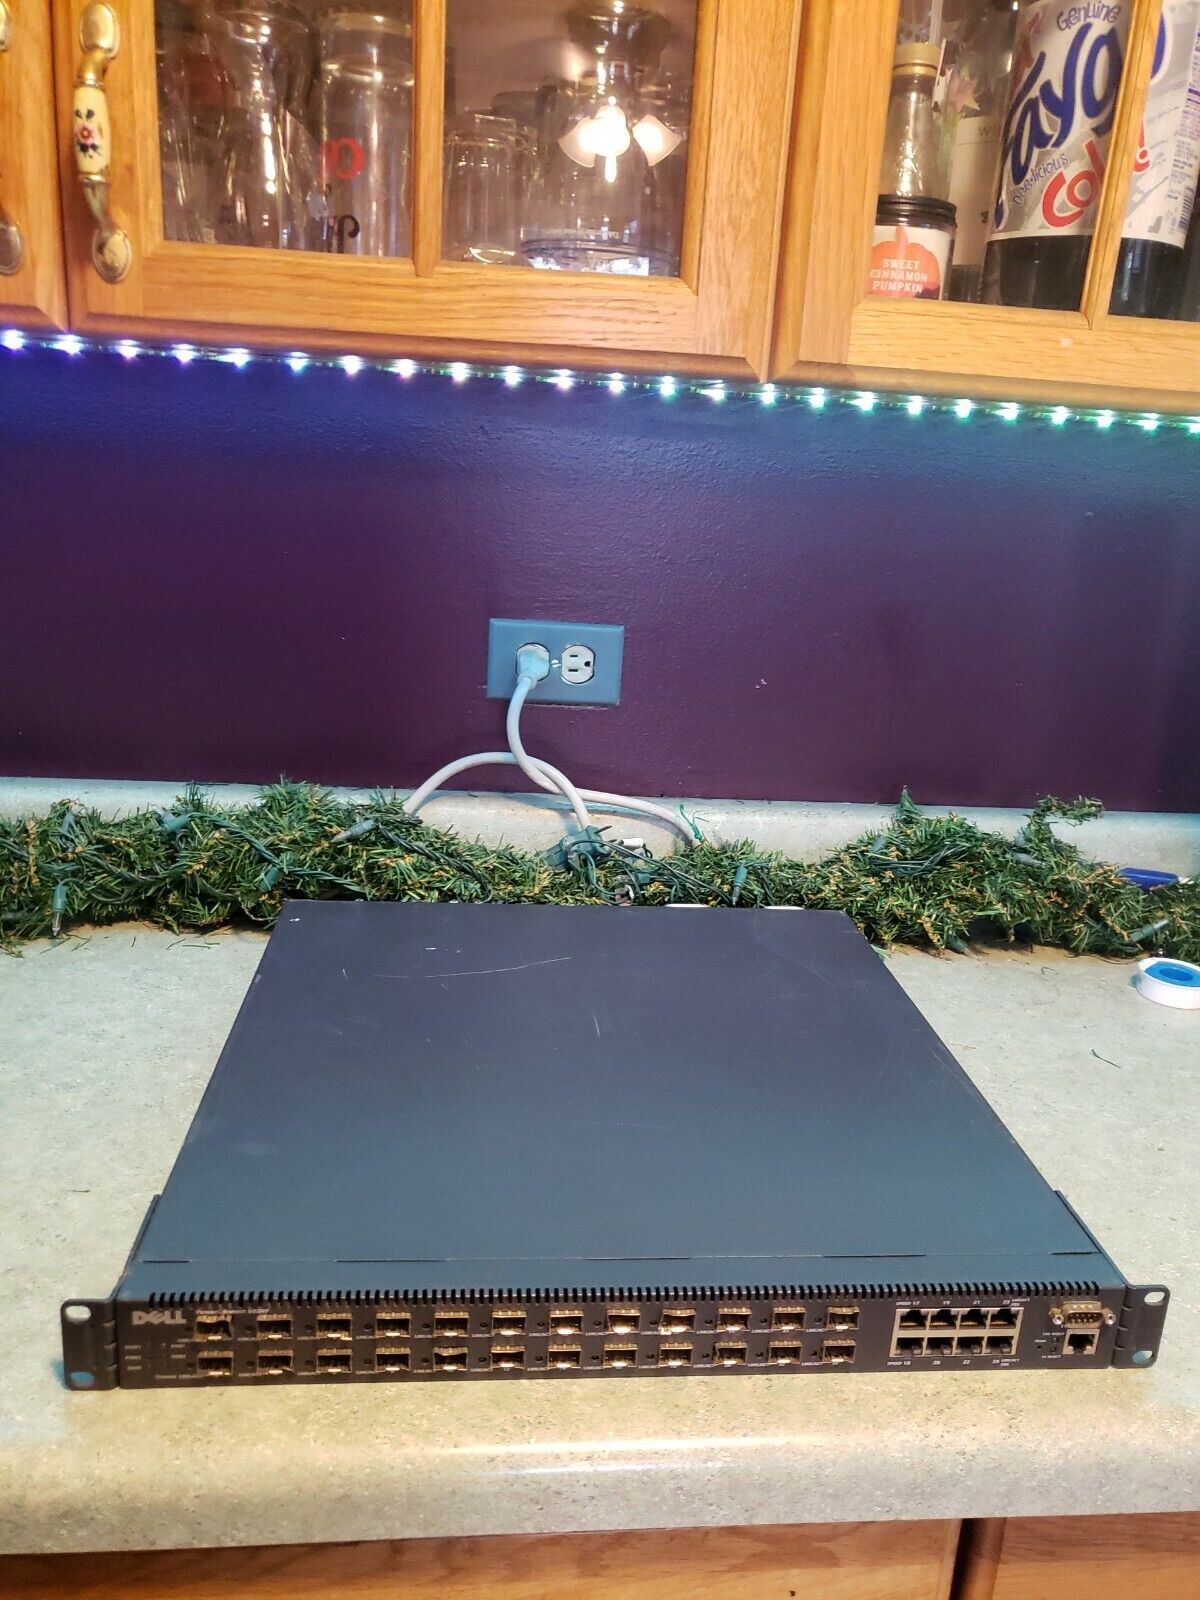 Dell PowerConnect 6024F Networking Switch